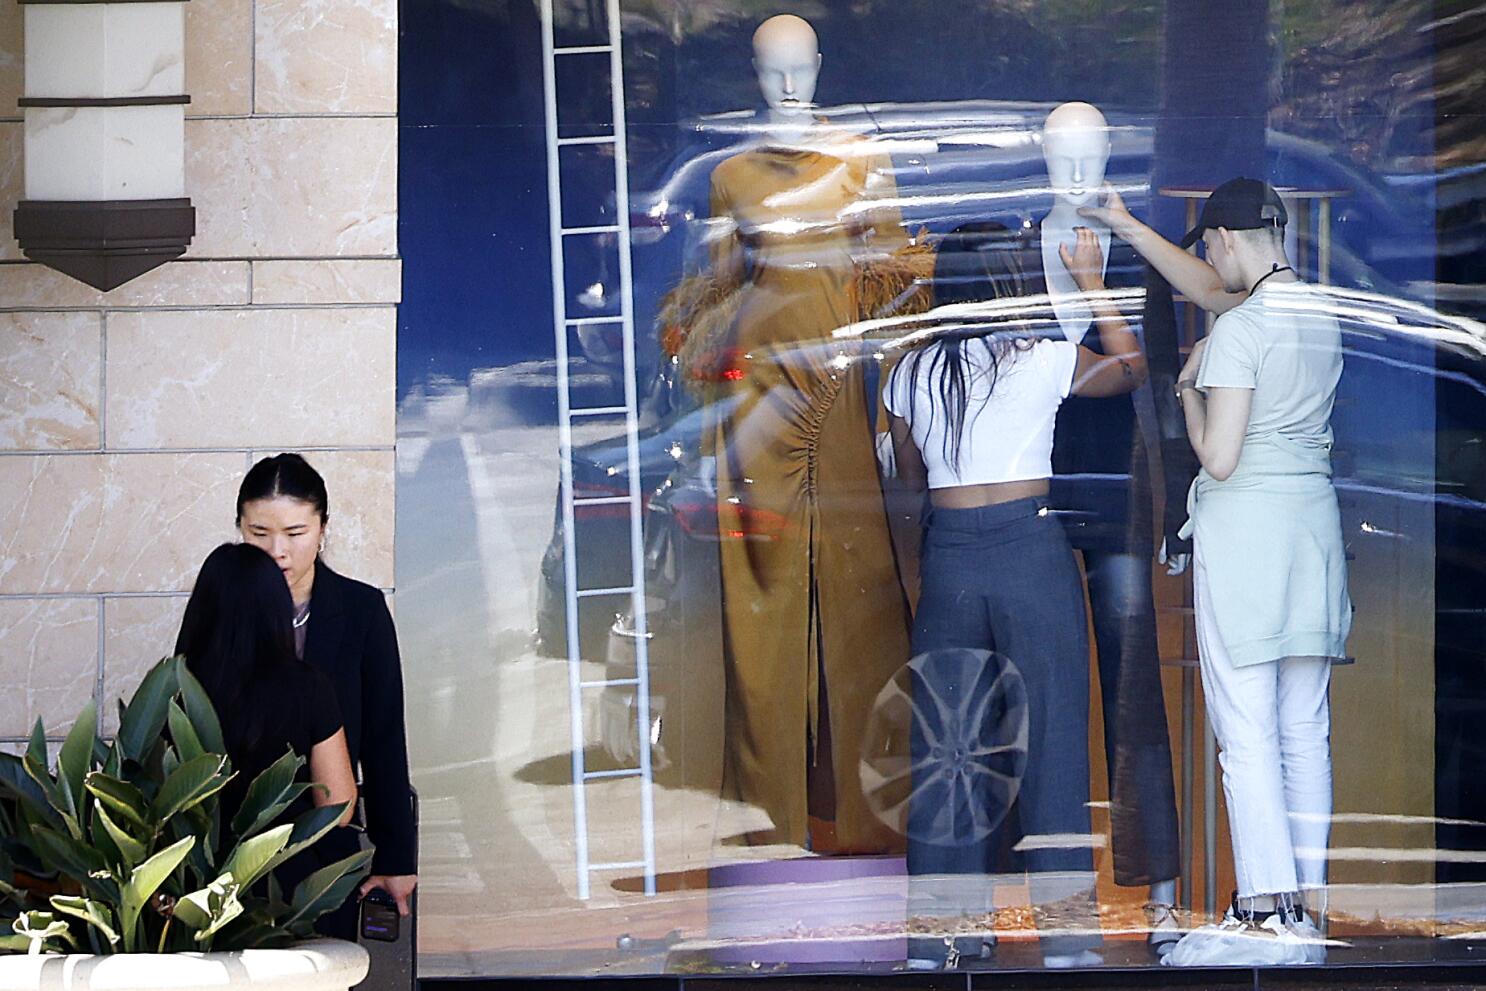 Luxury brands stores in San Francisco and Chicago hit by smash-and